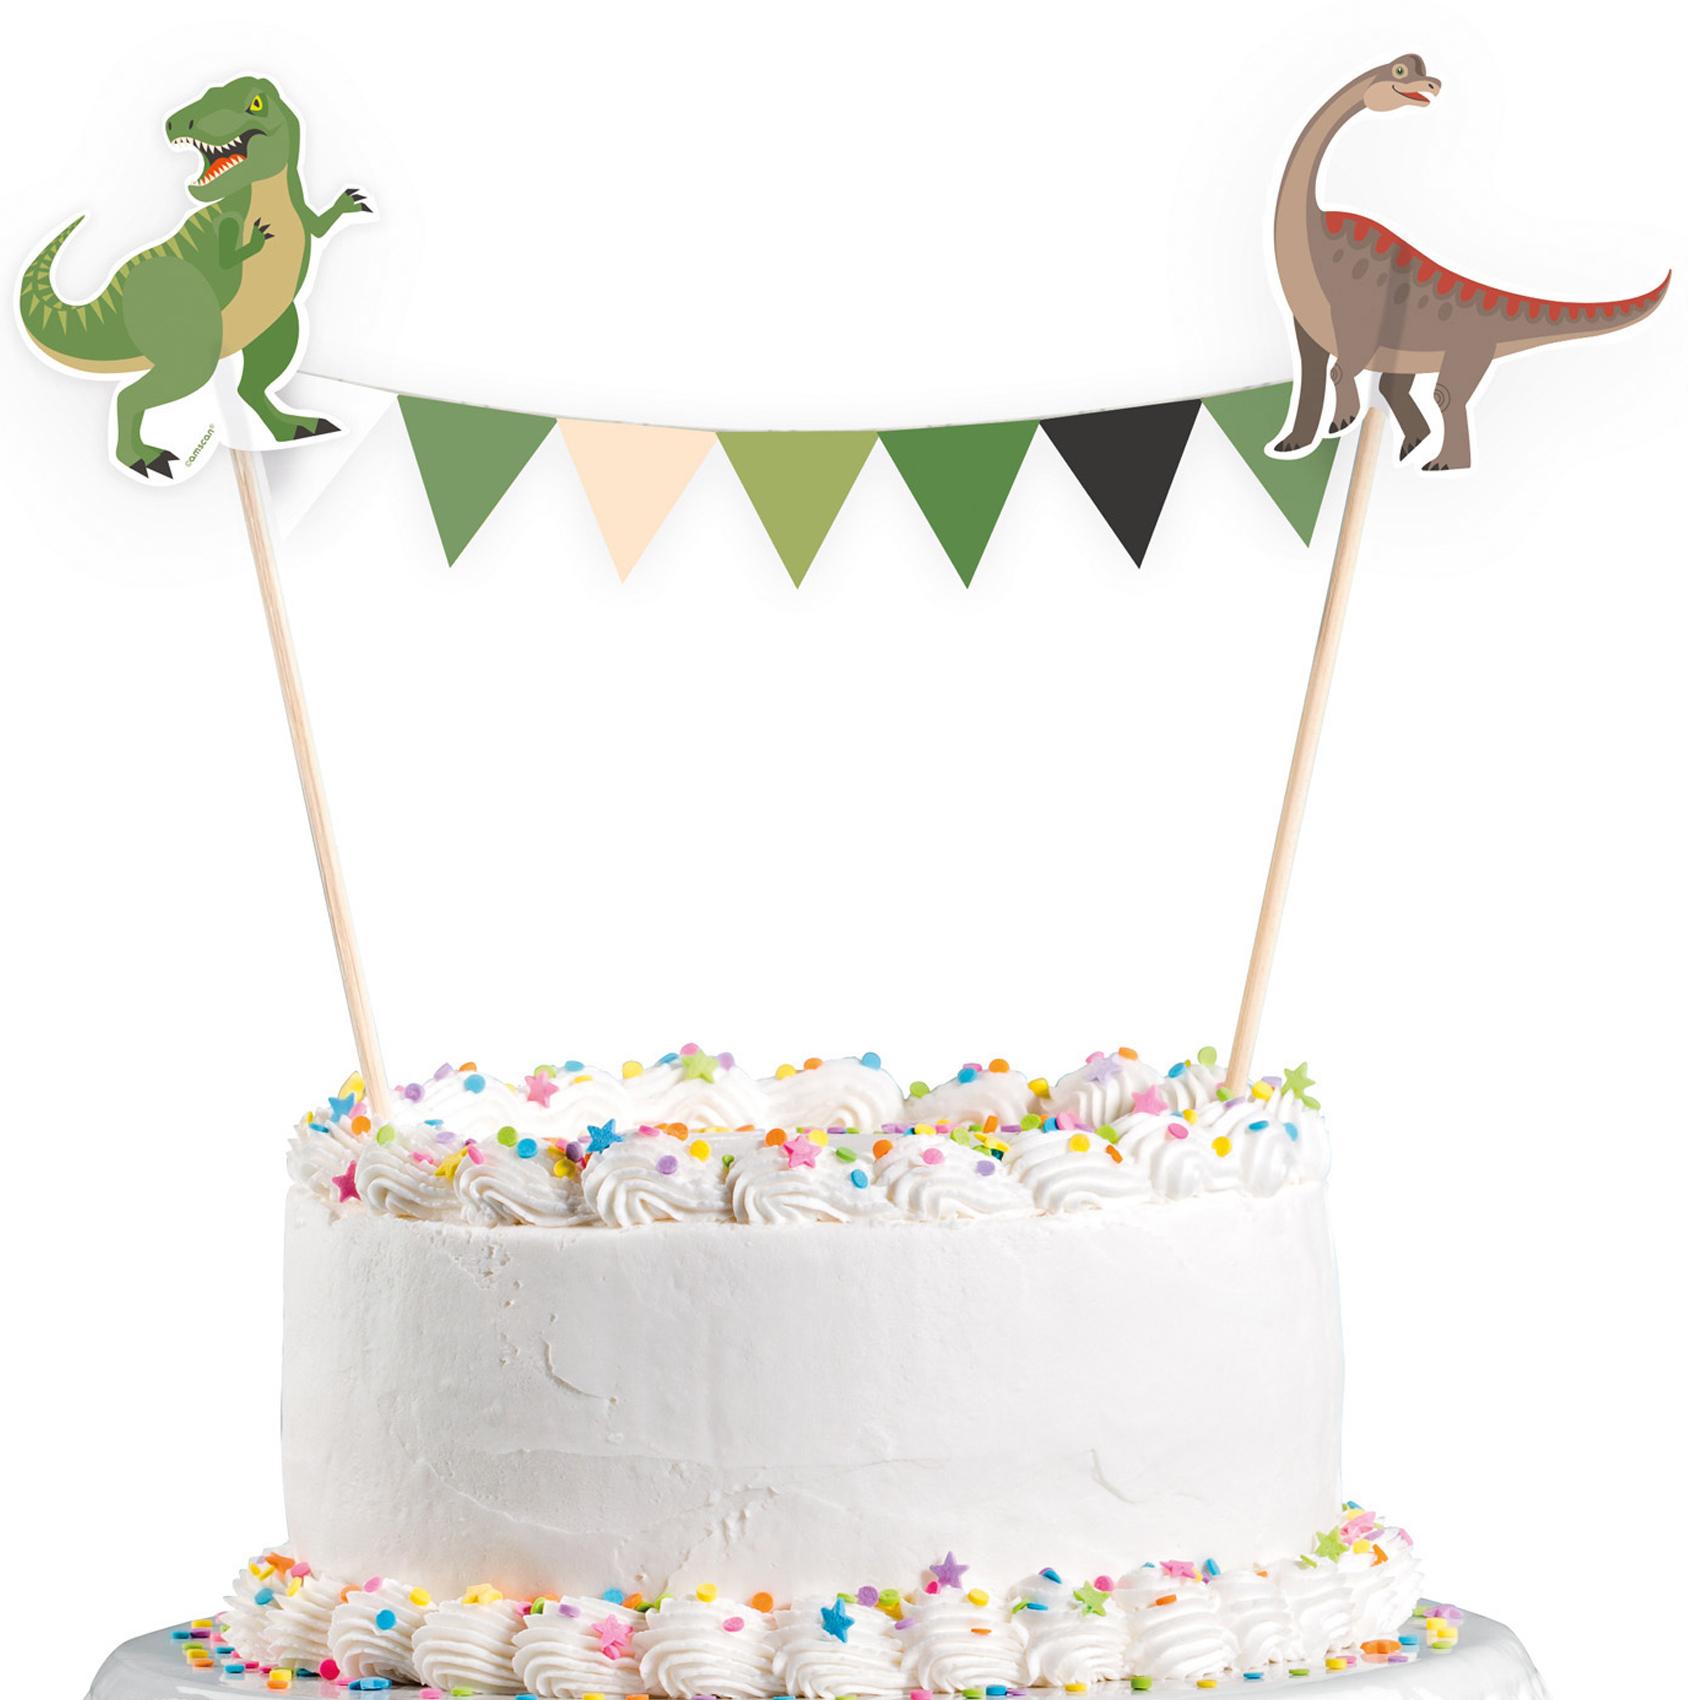 Happy Dinosaur Cake Bunting Party Accessories - Party Centre - Party Centre